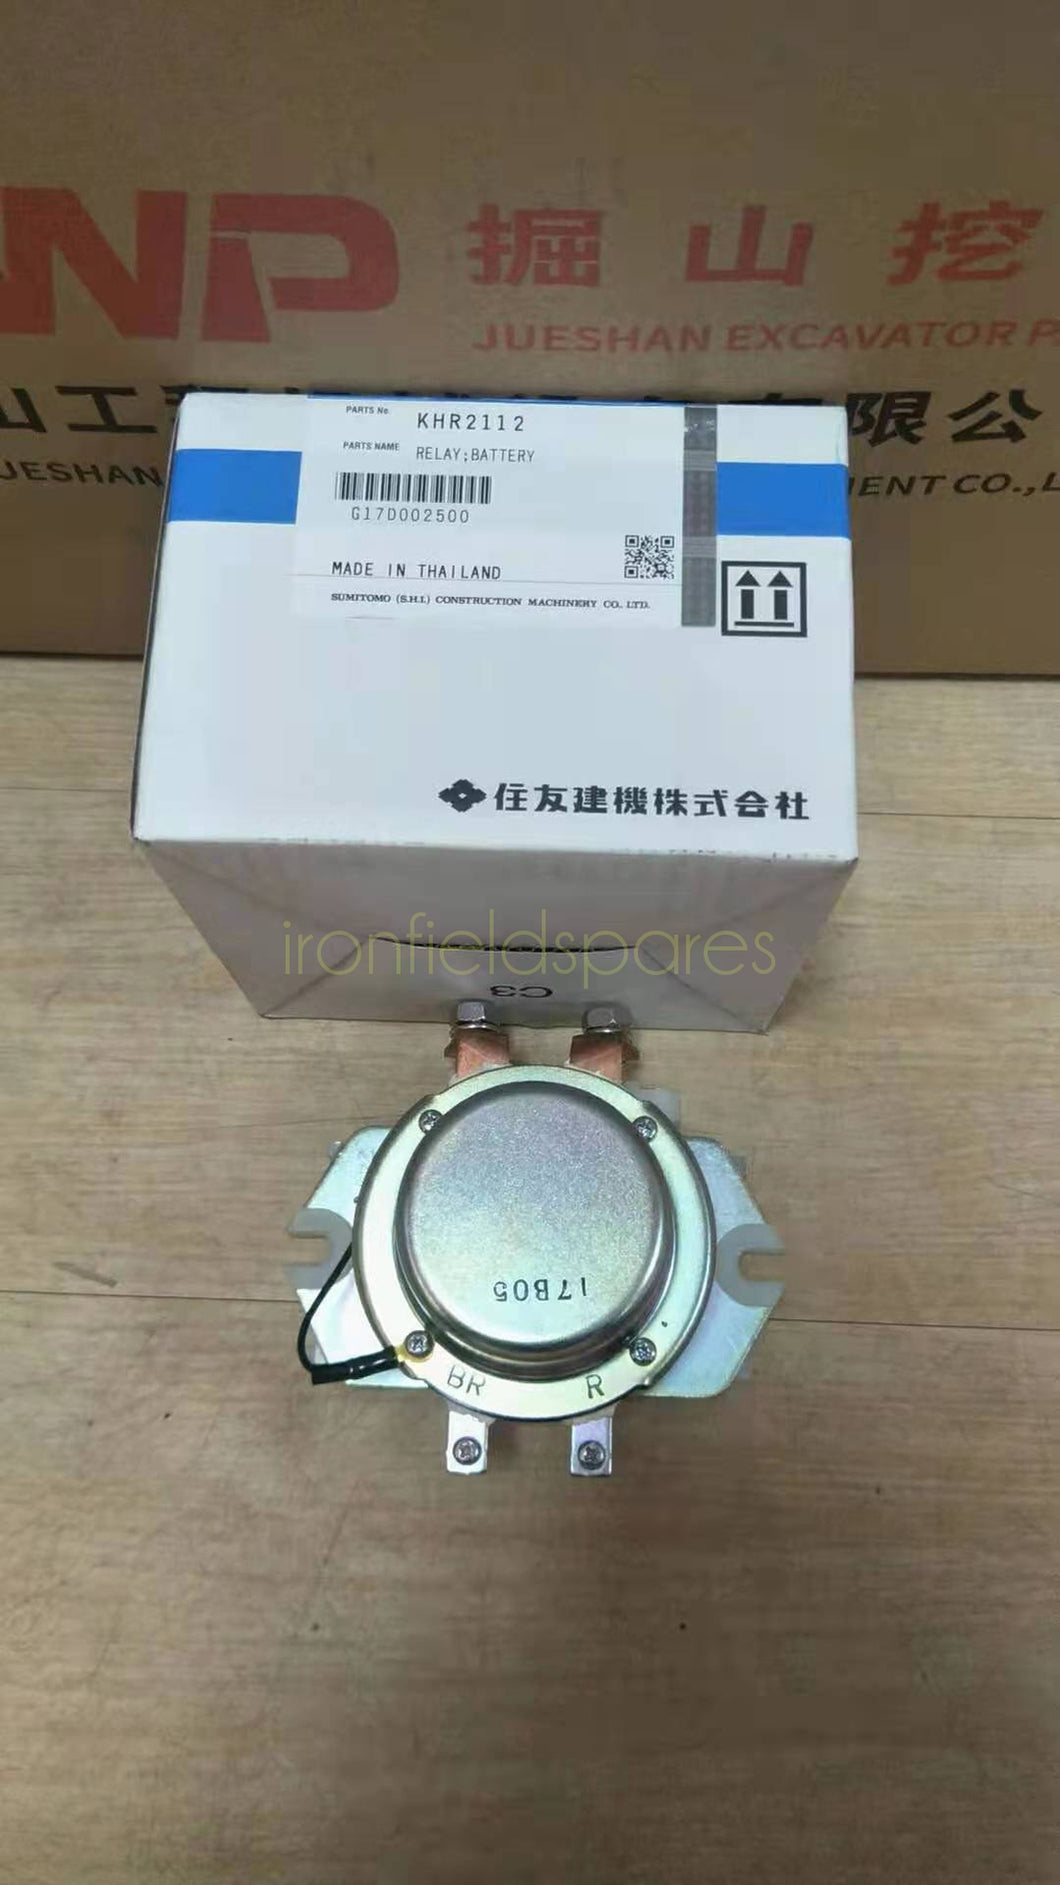 KHR 2112 Battery Relay for SUMITOMO SH200 and CASE Excavators